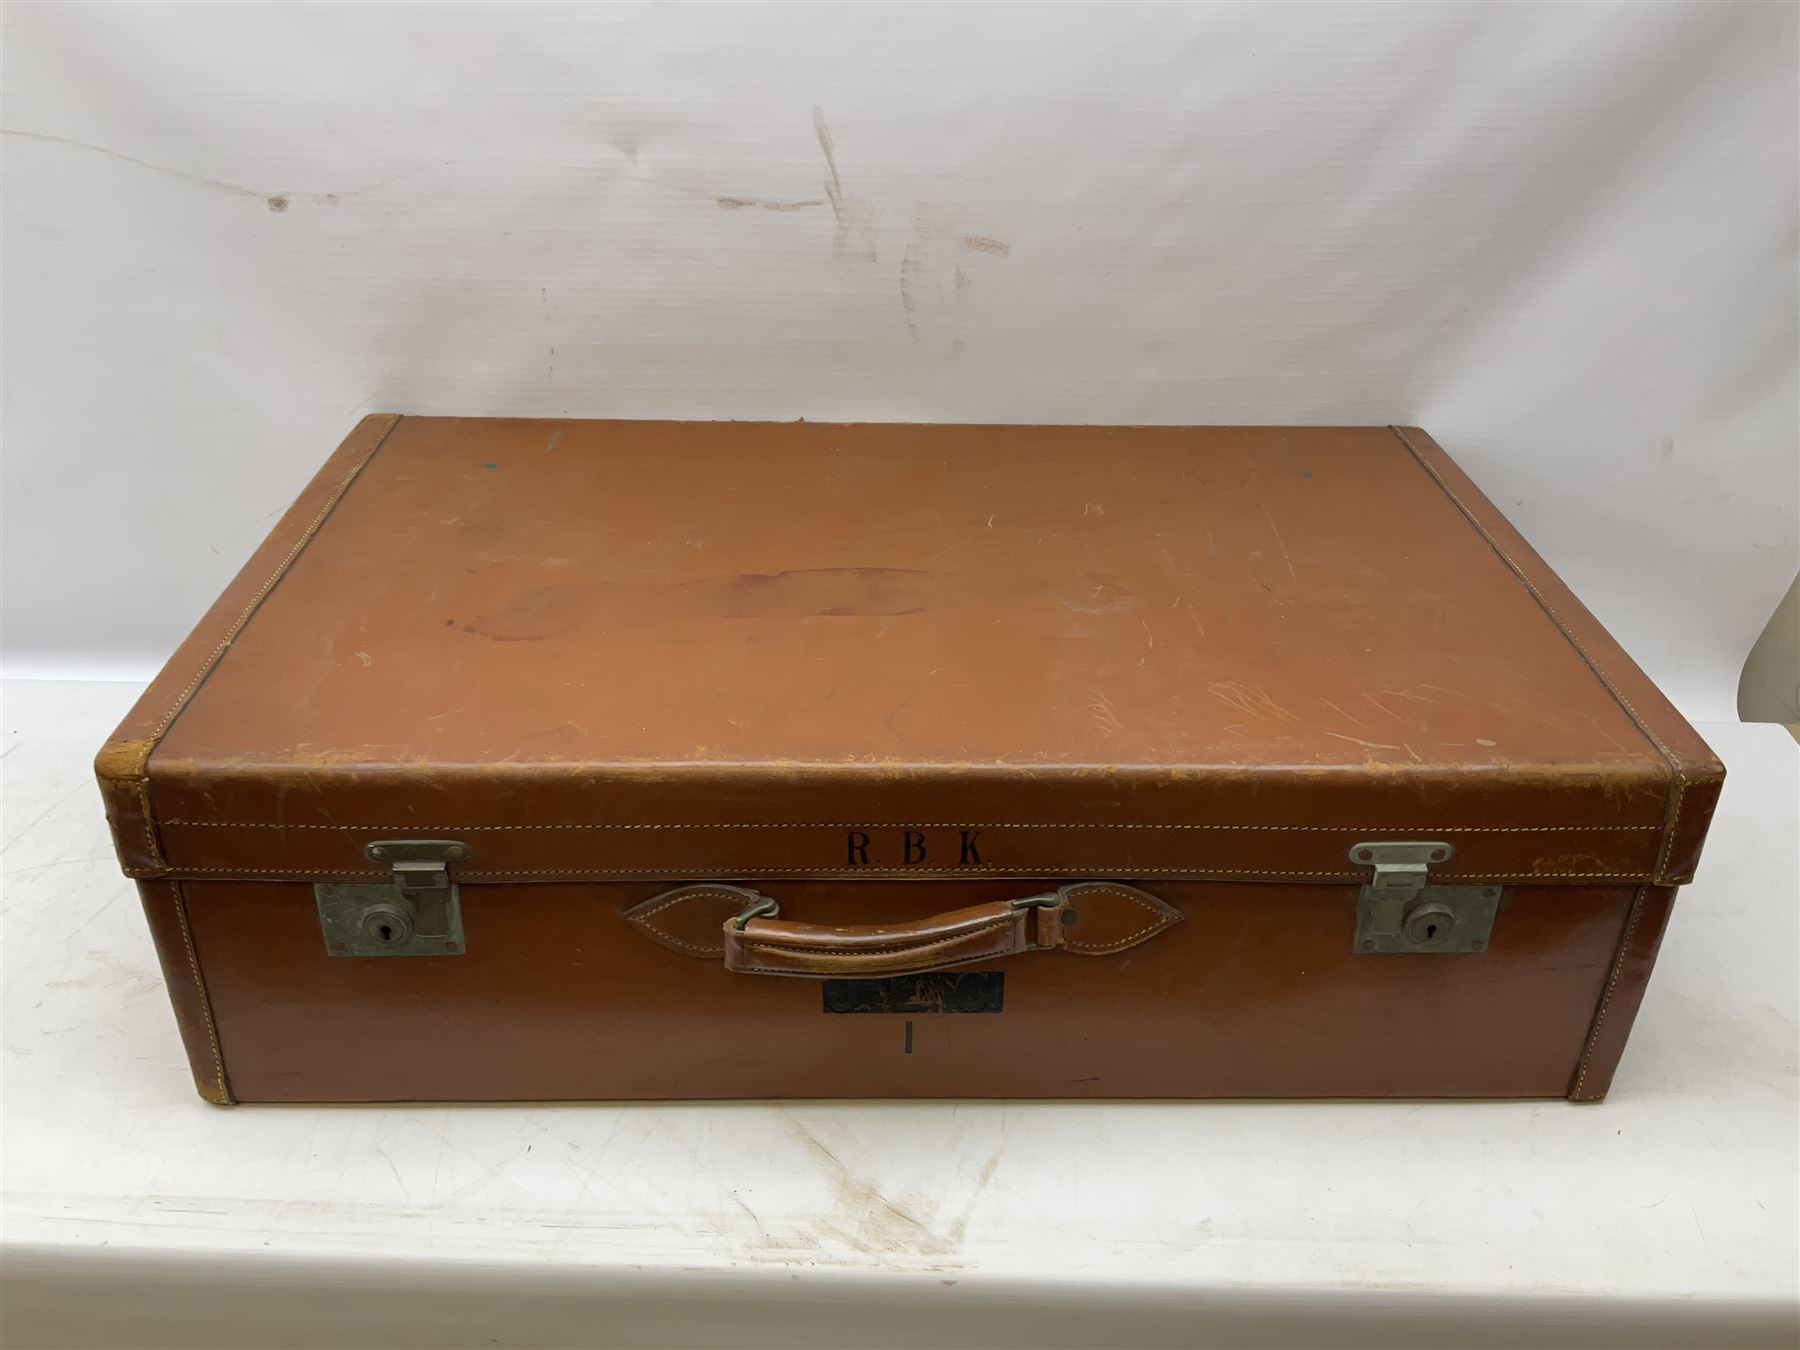 Two 20th century tan leather suitcases together with Lark violin and bow - Image 4 of 6